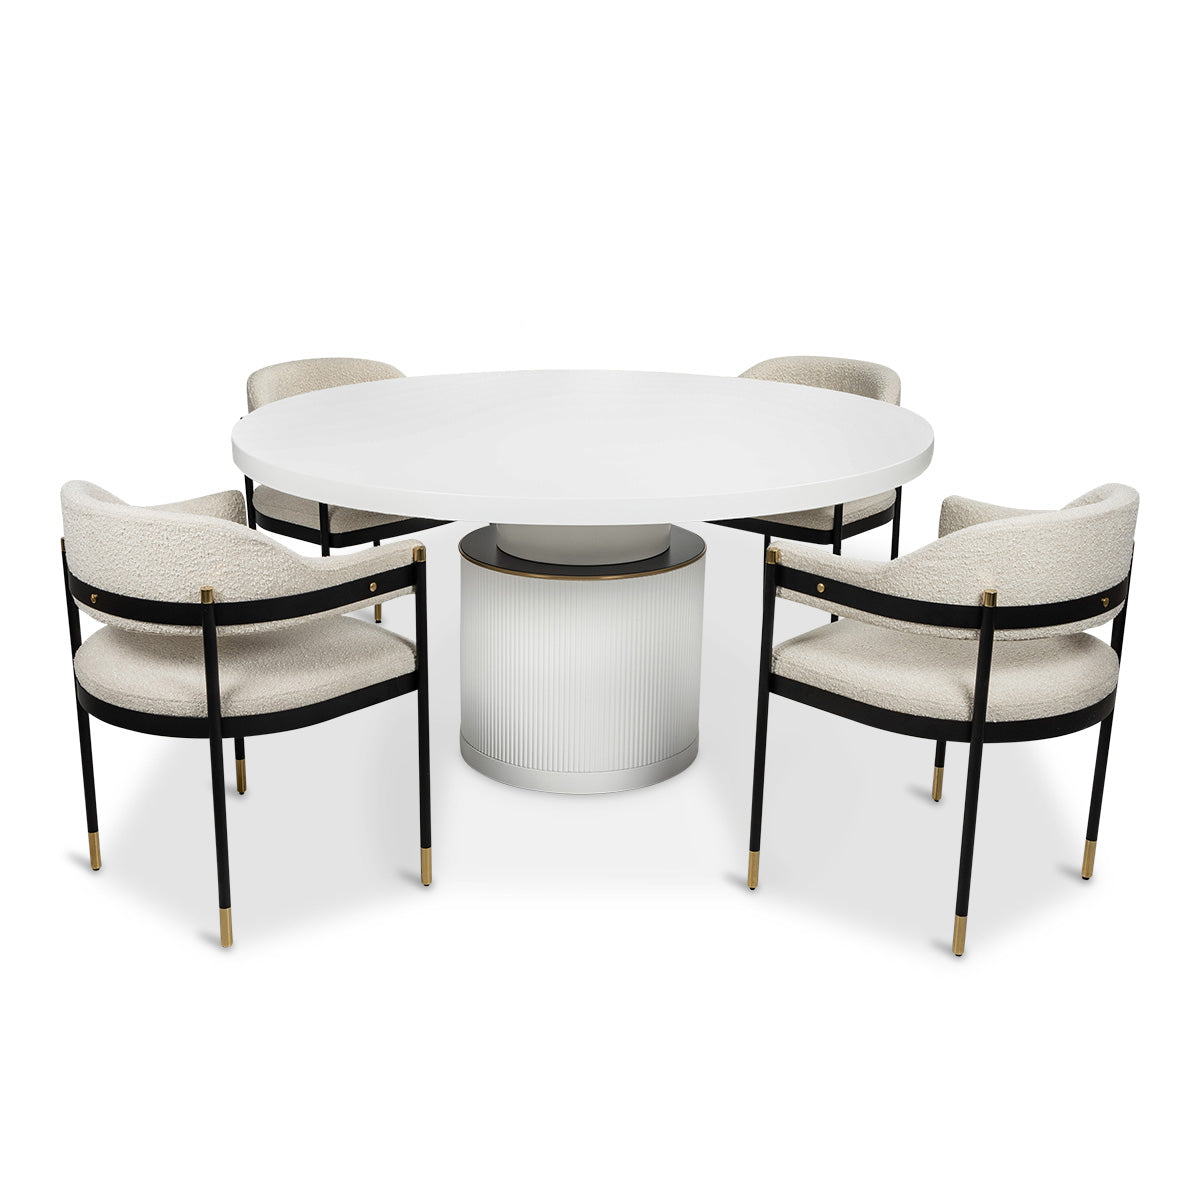 Istanbul Round Dining Table in Matte White Lacquer